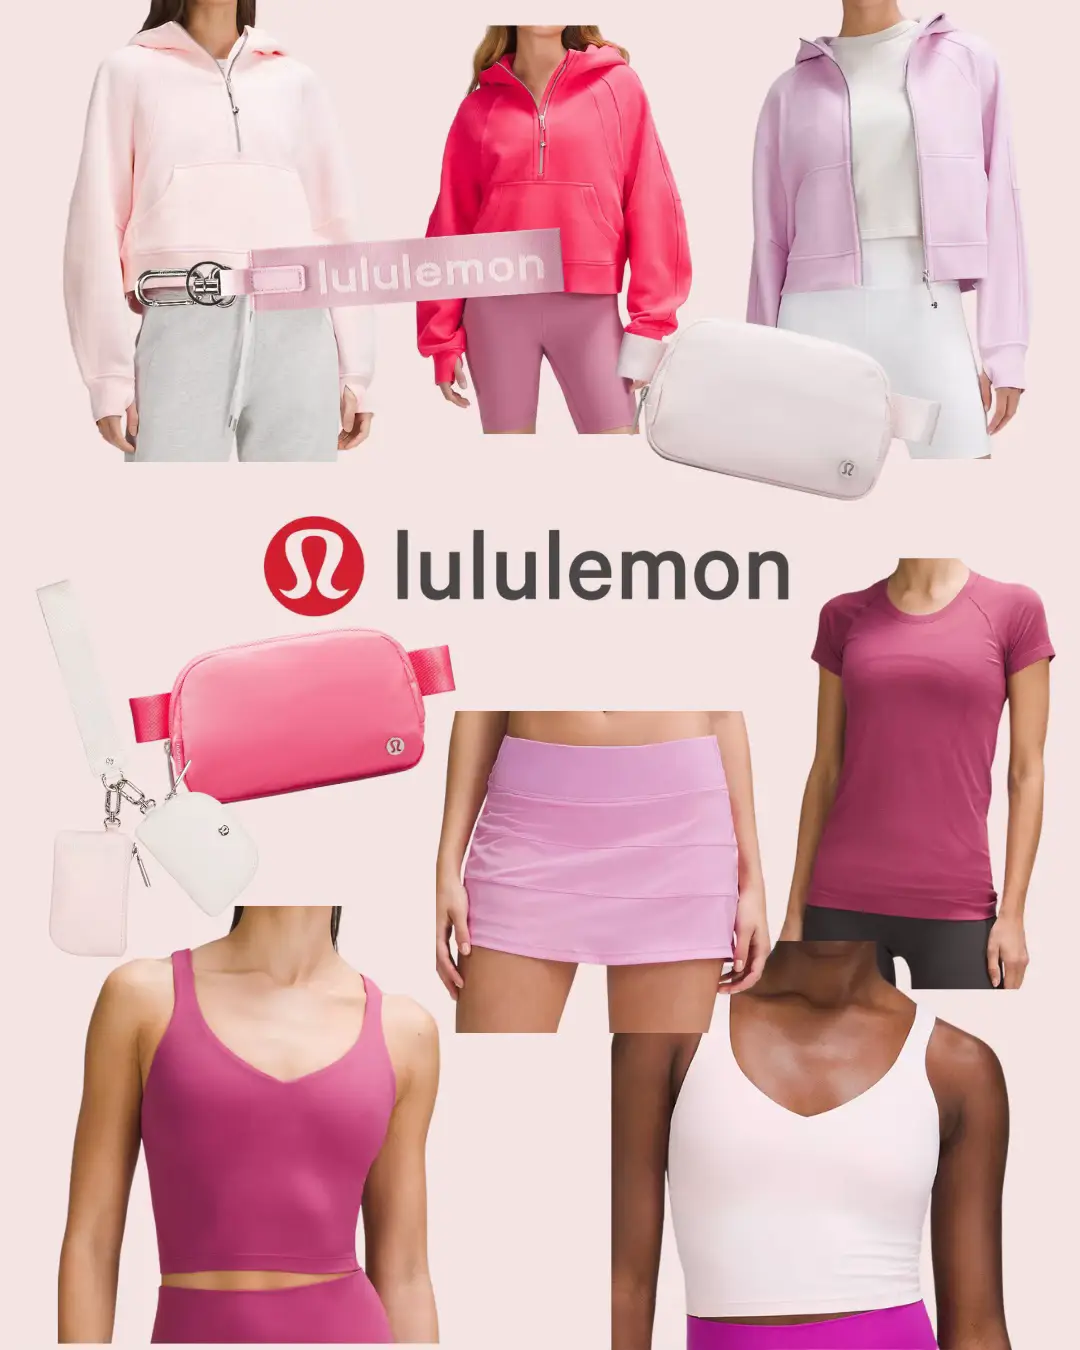 ad 🔗 is in my bio to shop all things sonic pink @lululemon 💗🫶🏻💘